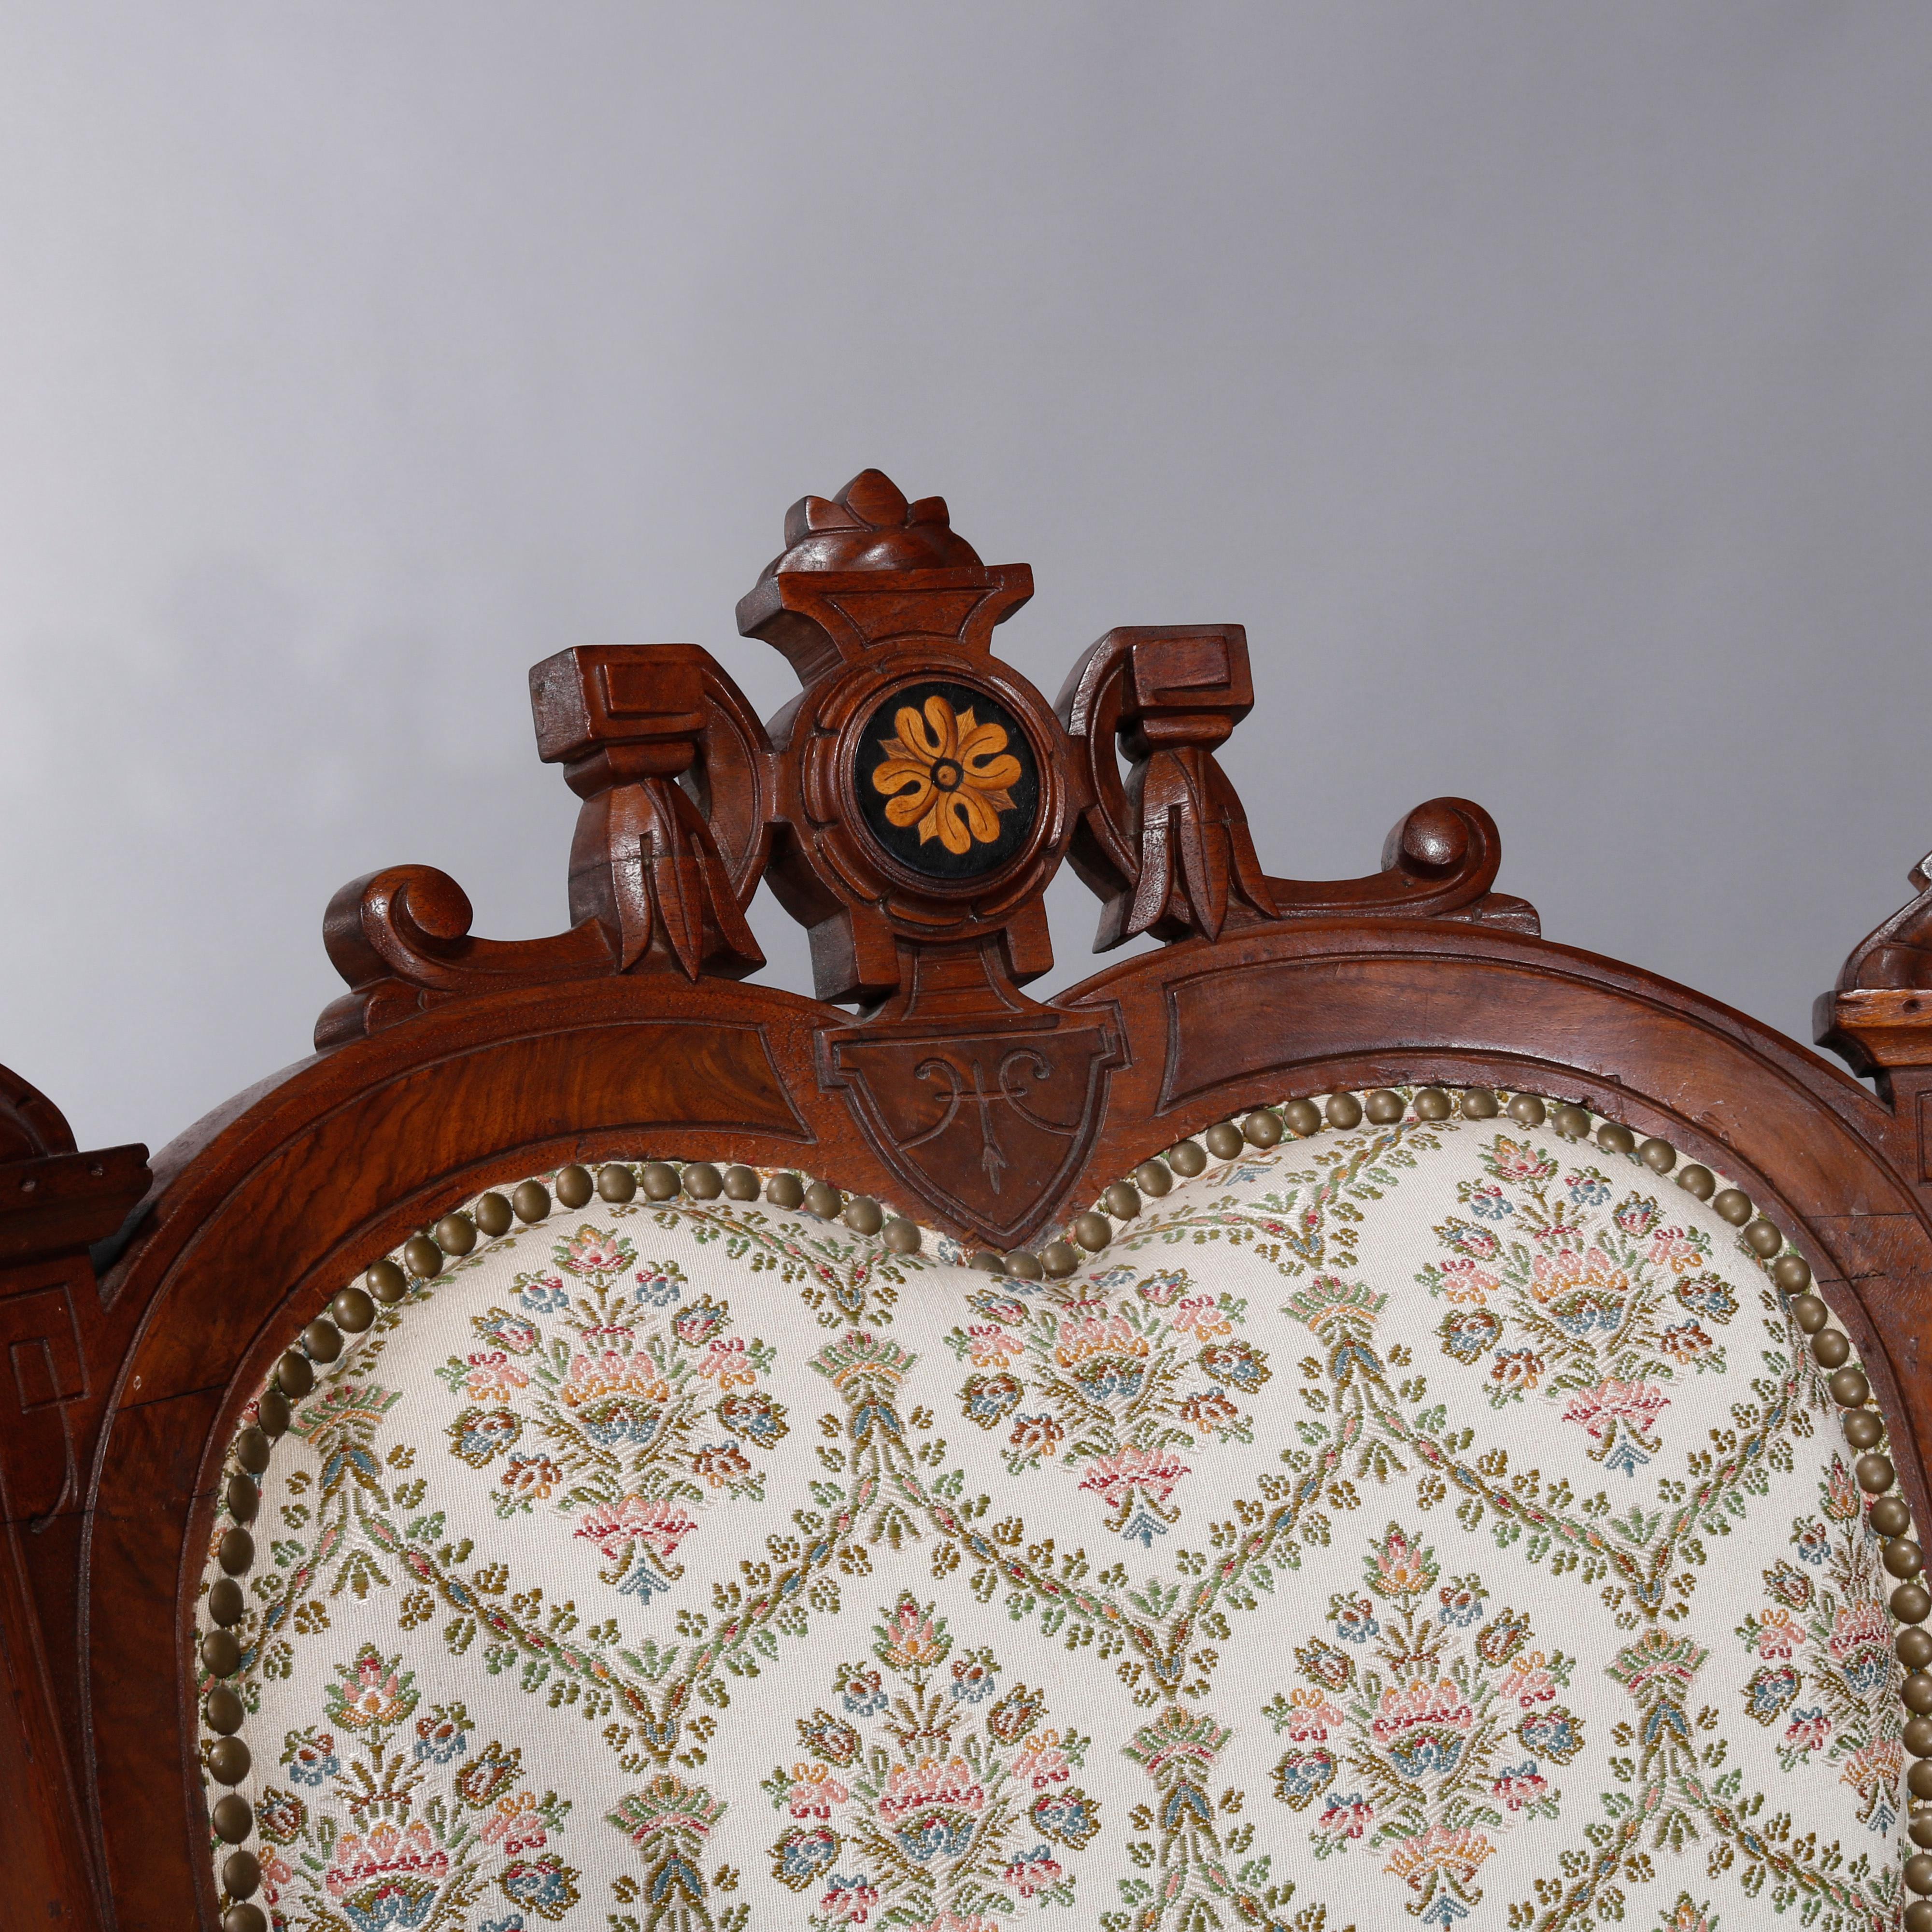 An antique pair of Renaissance Revival parlor armchairs offer walnut frames with burl insets having heart form backs with carved crest with central patera marquetry element, scroll form arms flank seats raised on balustrade legs, c1880

Measures: